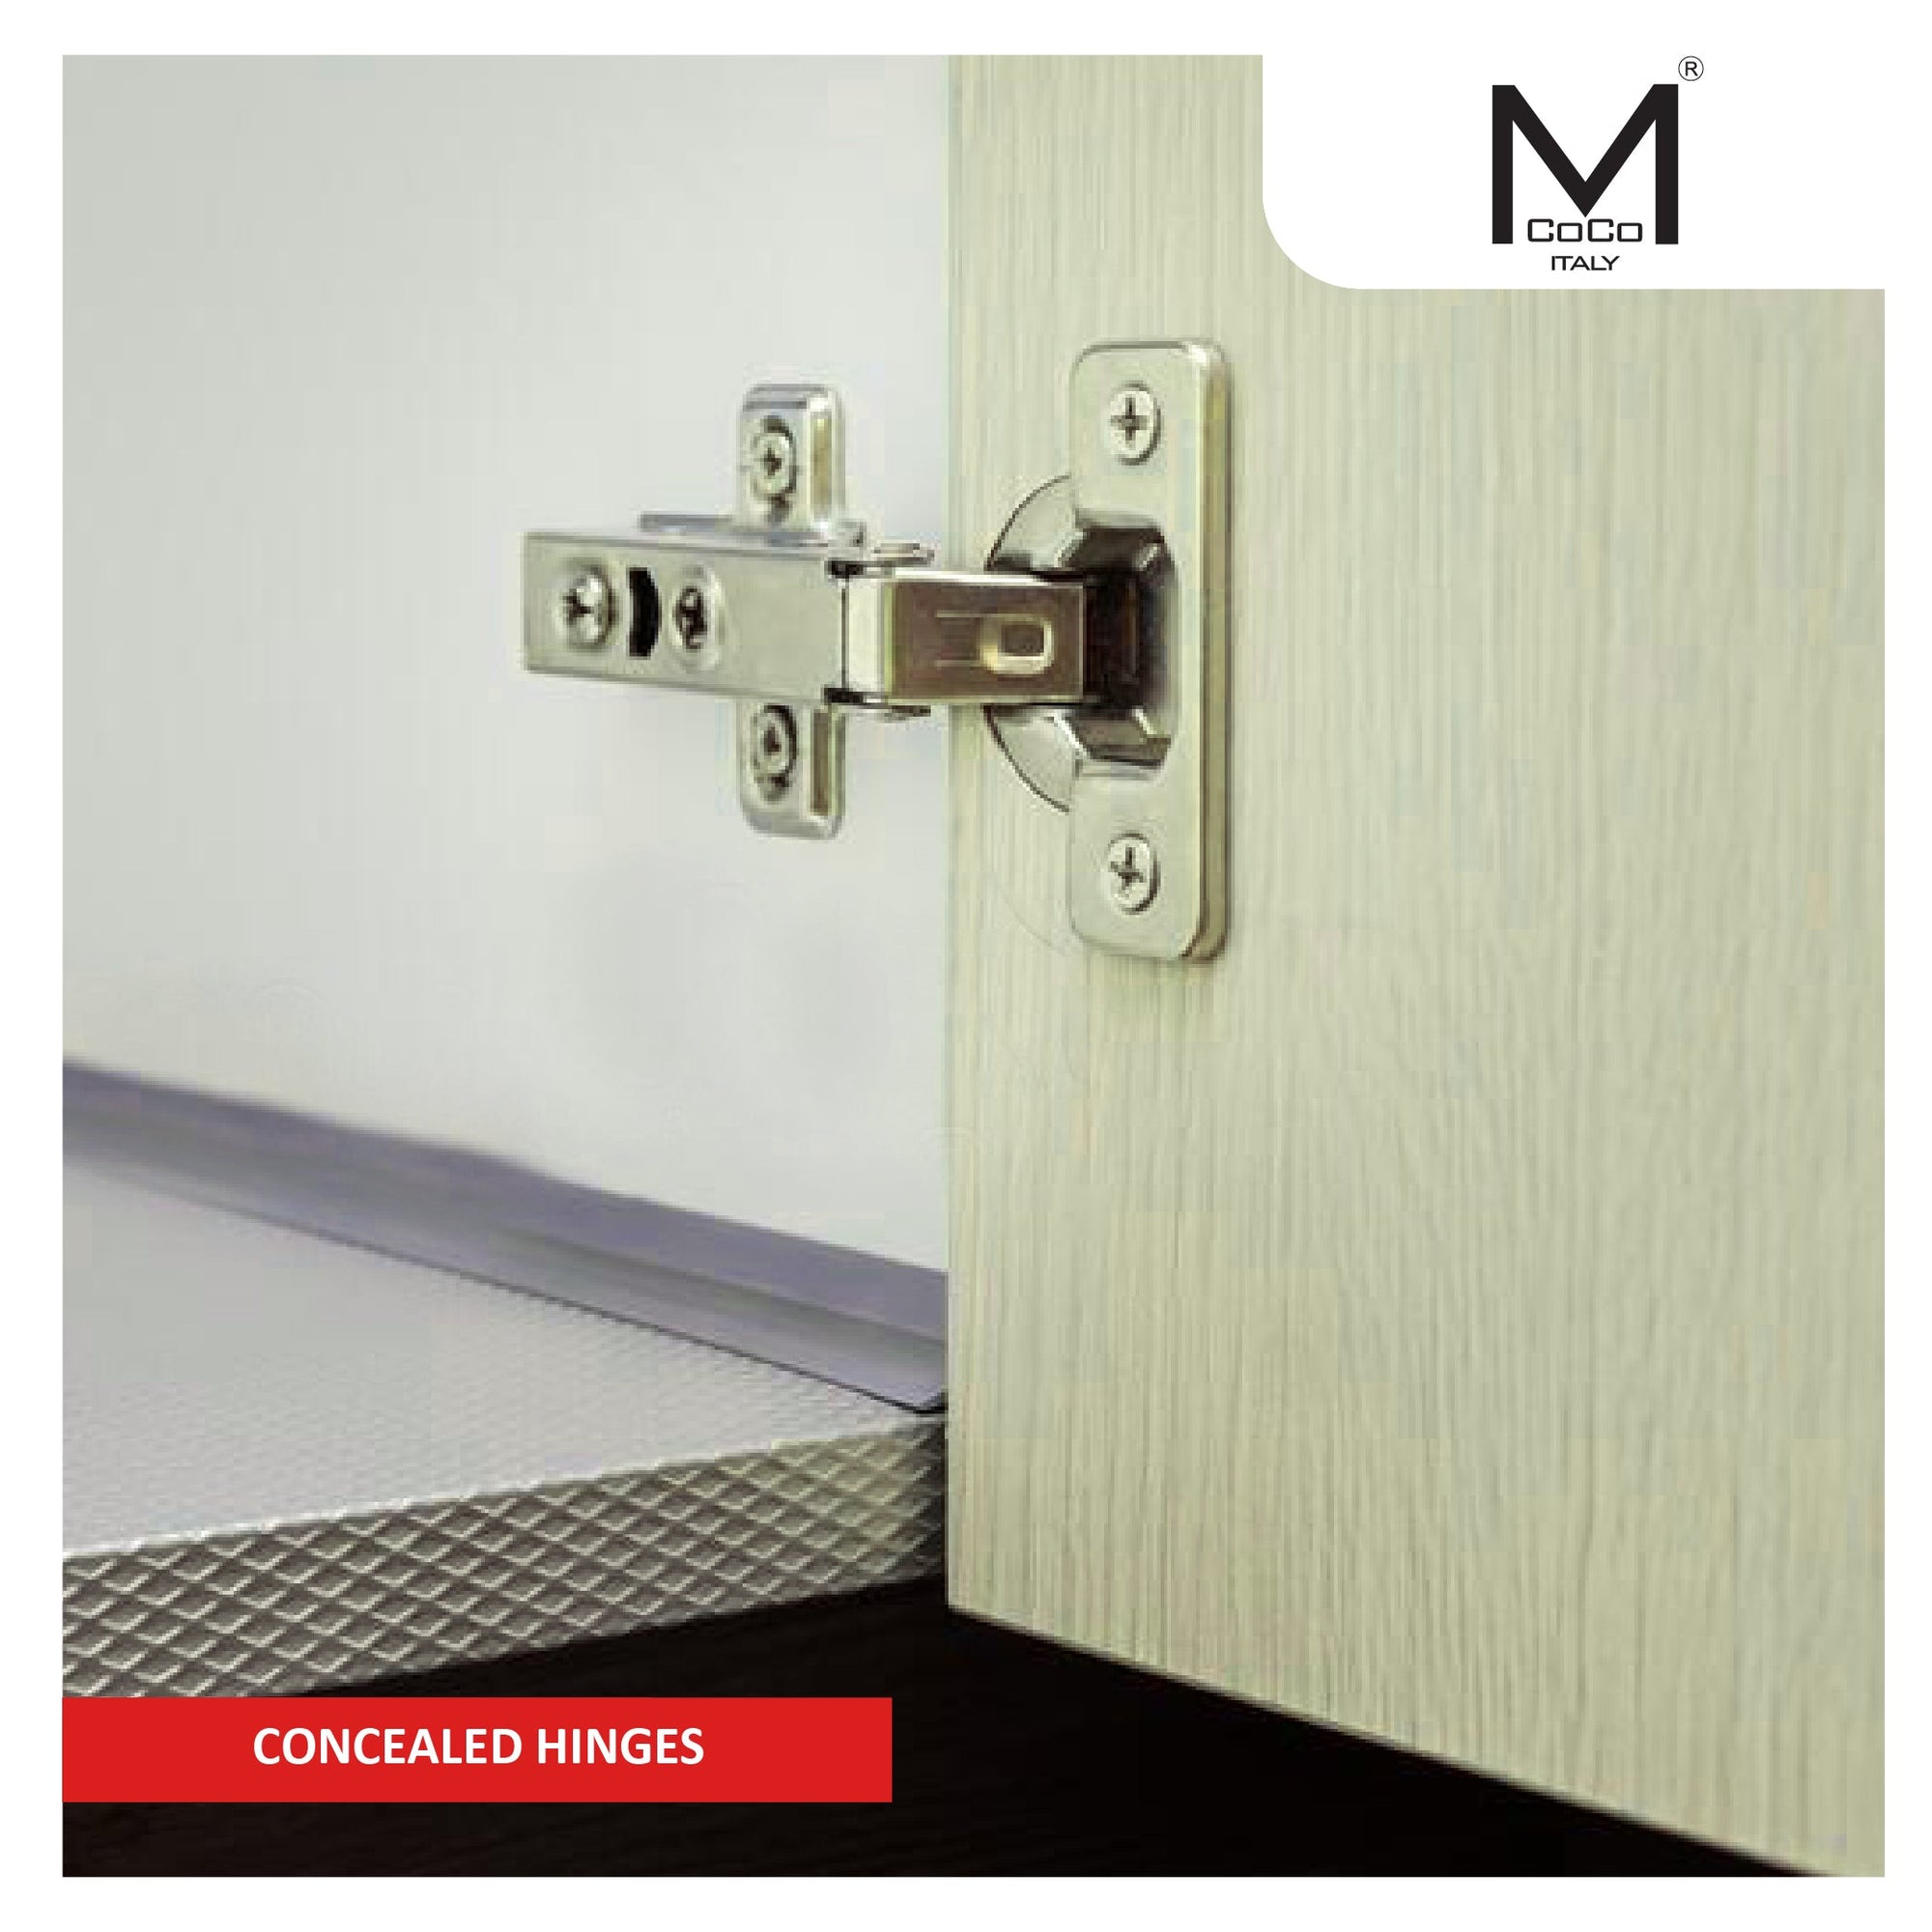 Mcoco Concealed Hinges - High-Quality Door Hinges for Seamless Installations